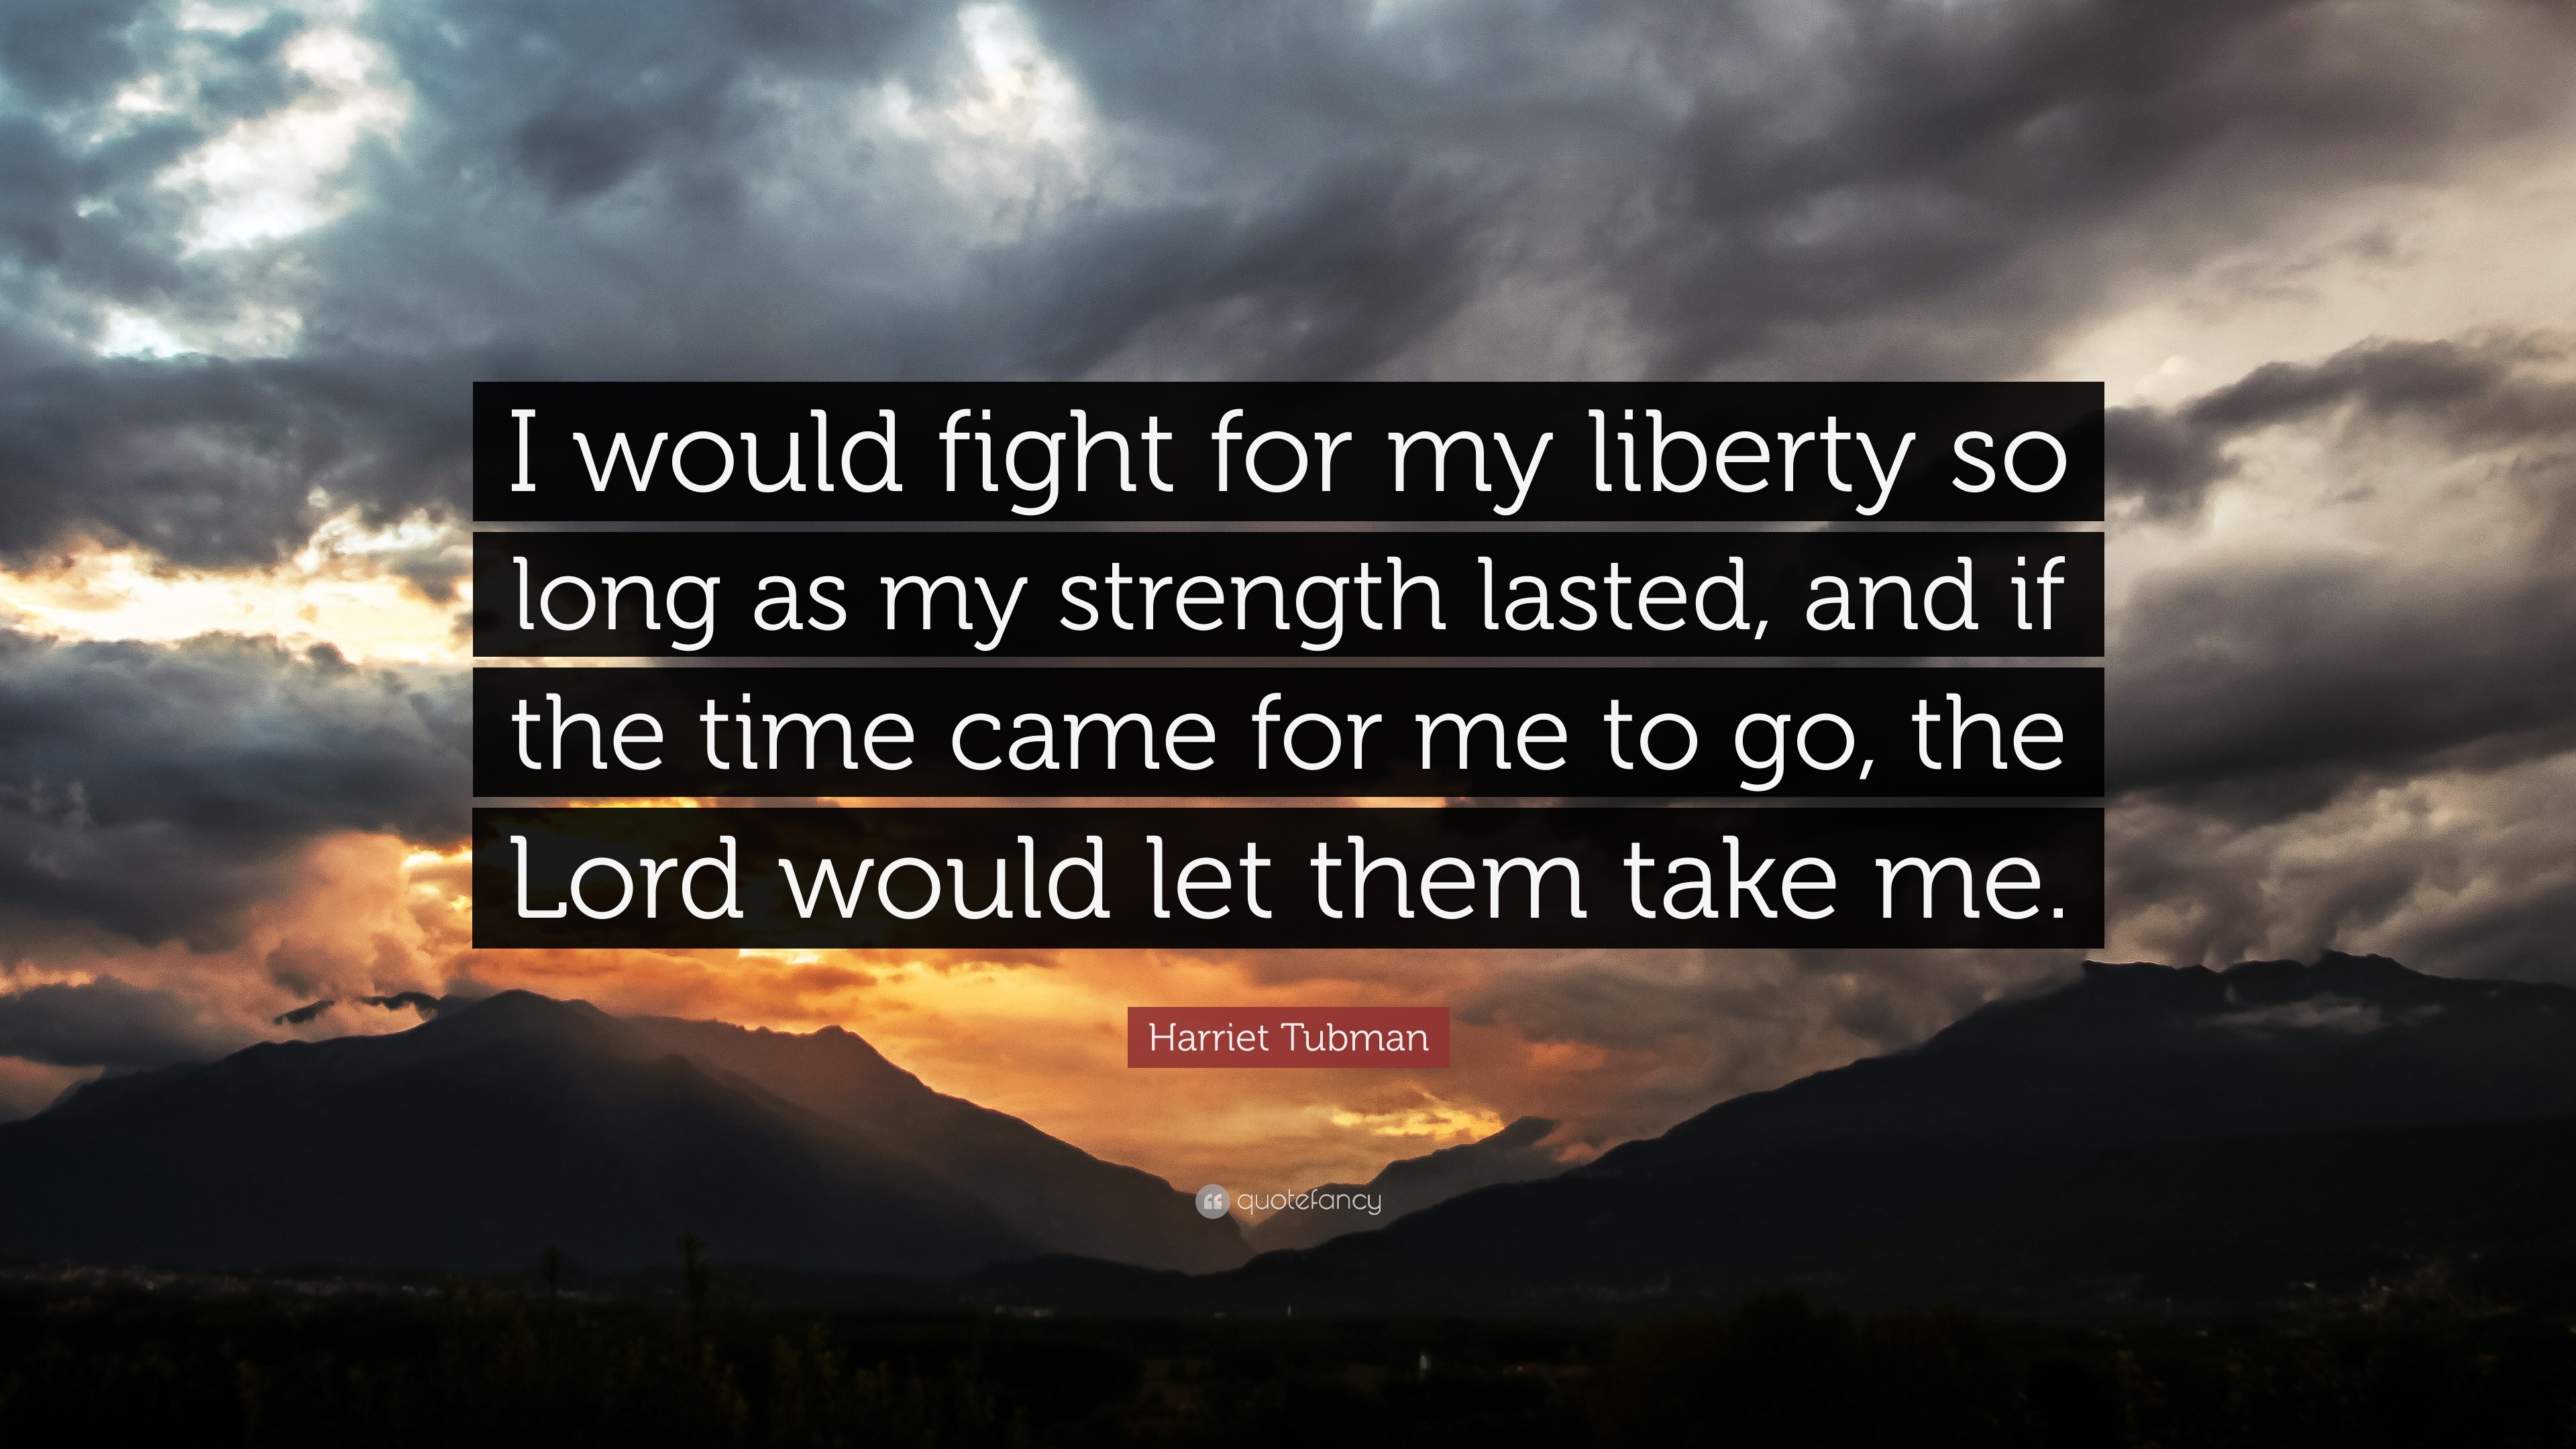 1118509 Harriet Tubman Quote I would fight for my liberty so long as my